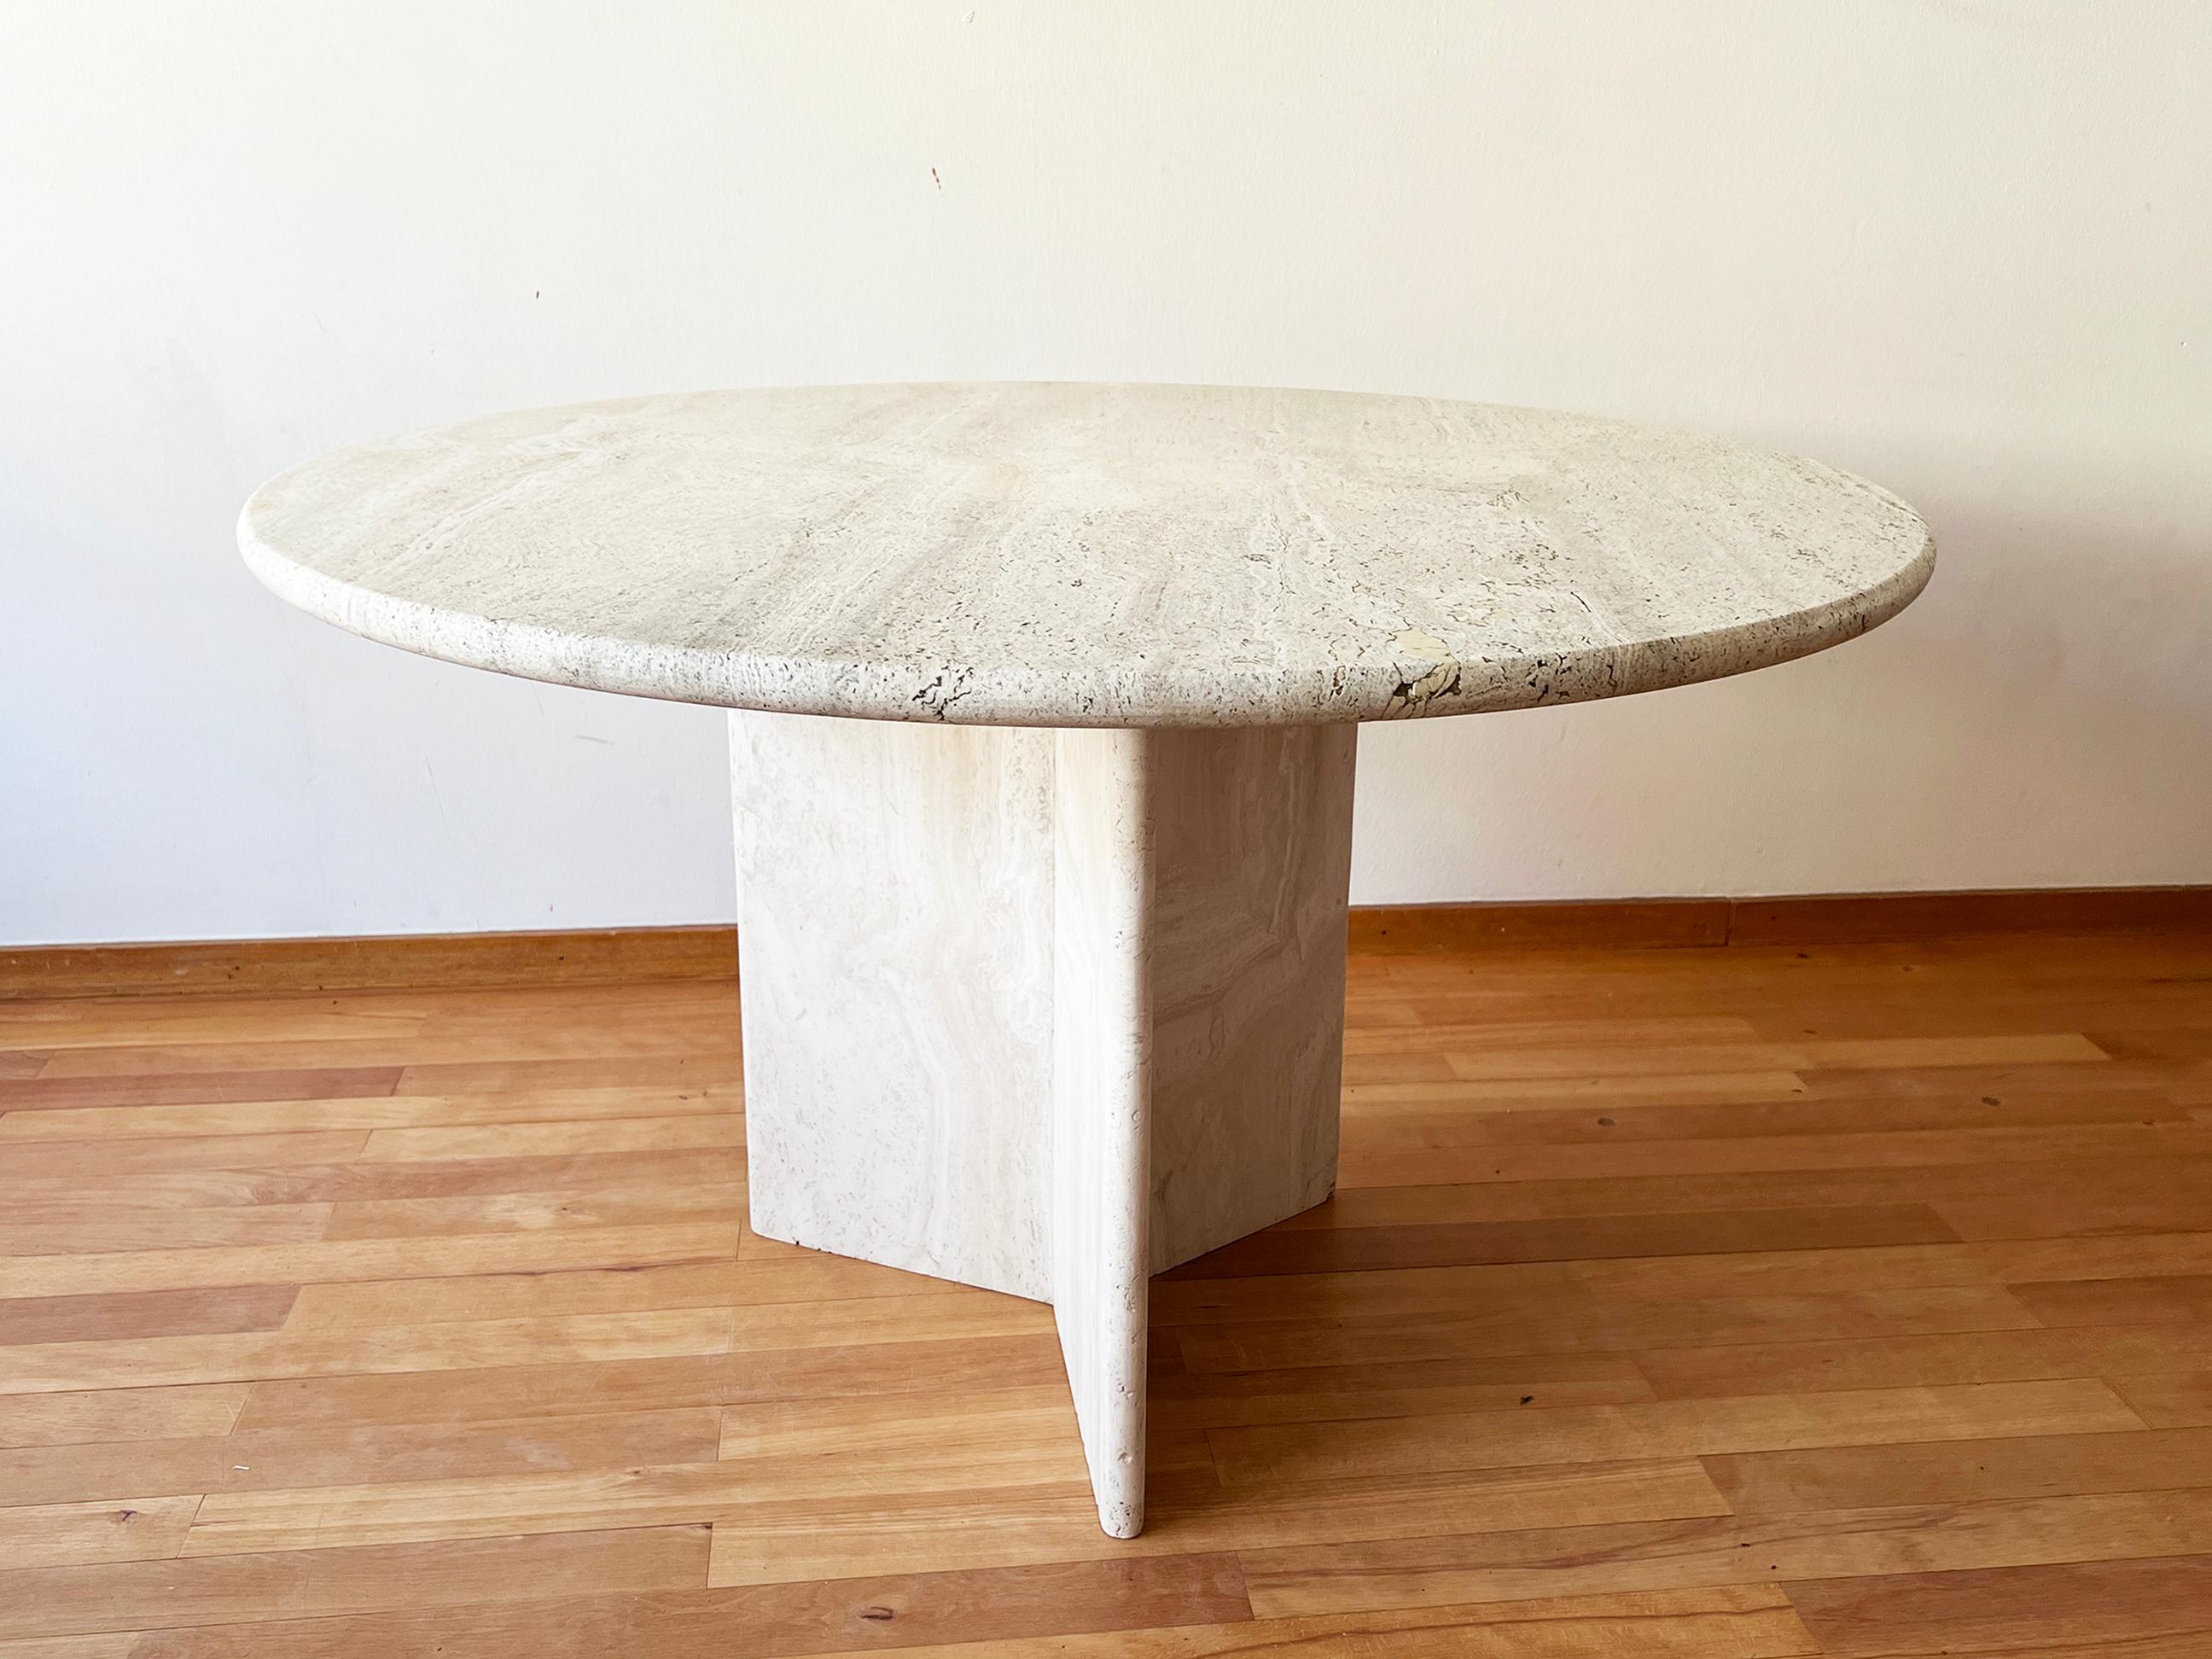 Postmodern 1970s Cream Off White Round Travertine Dining Table, Pedestal Base For Sale 1